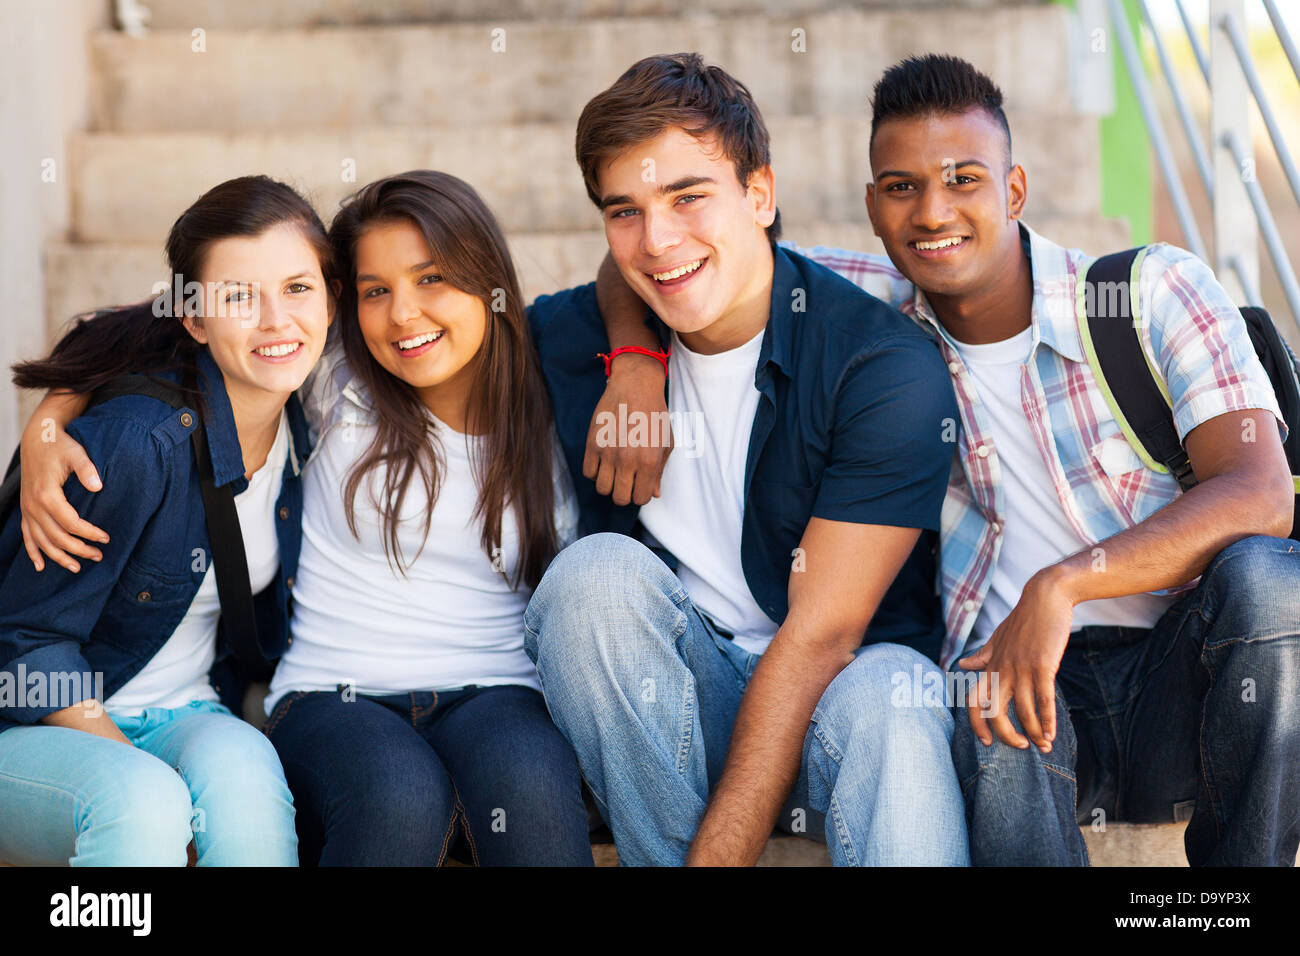 group of cheerful high school students friends Stock Photo